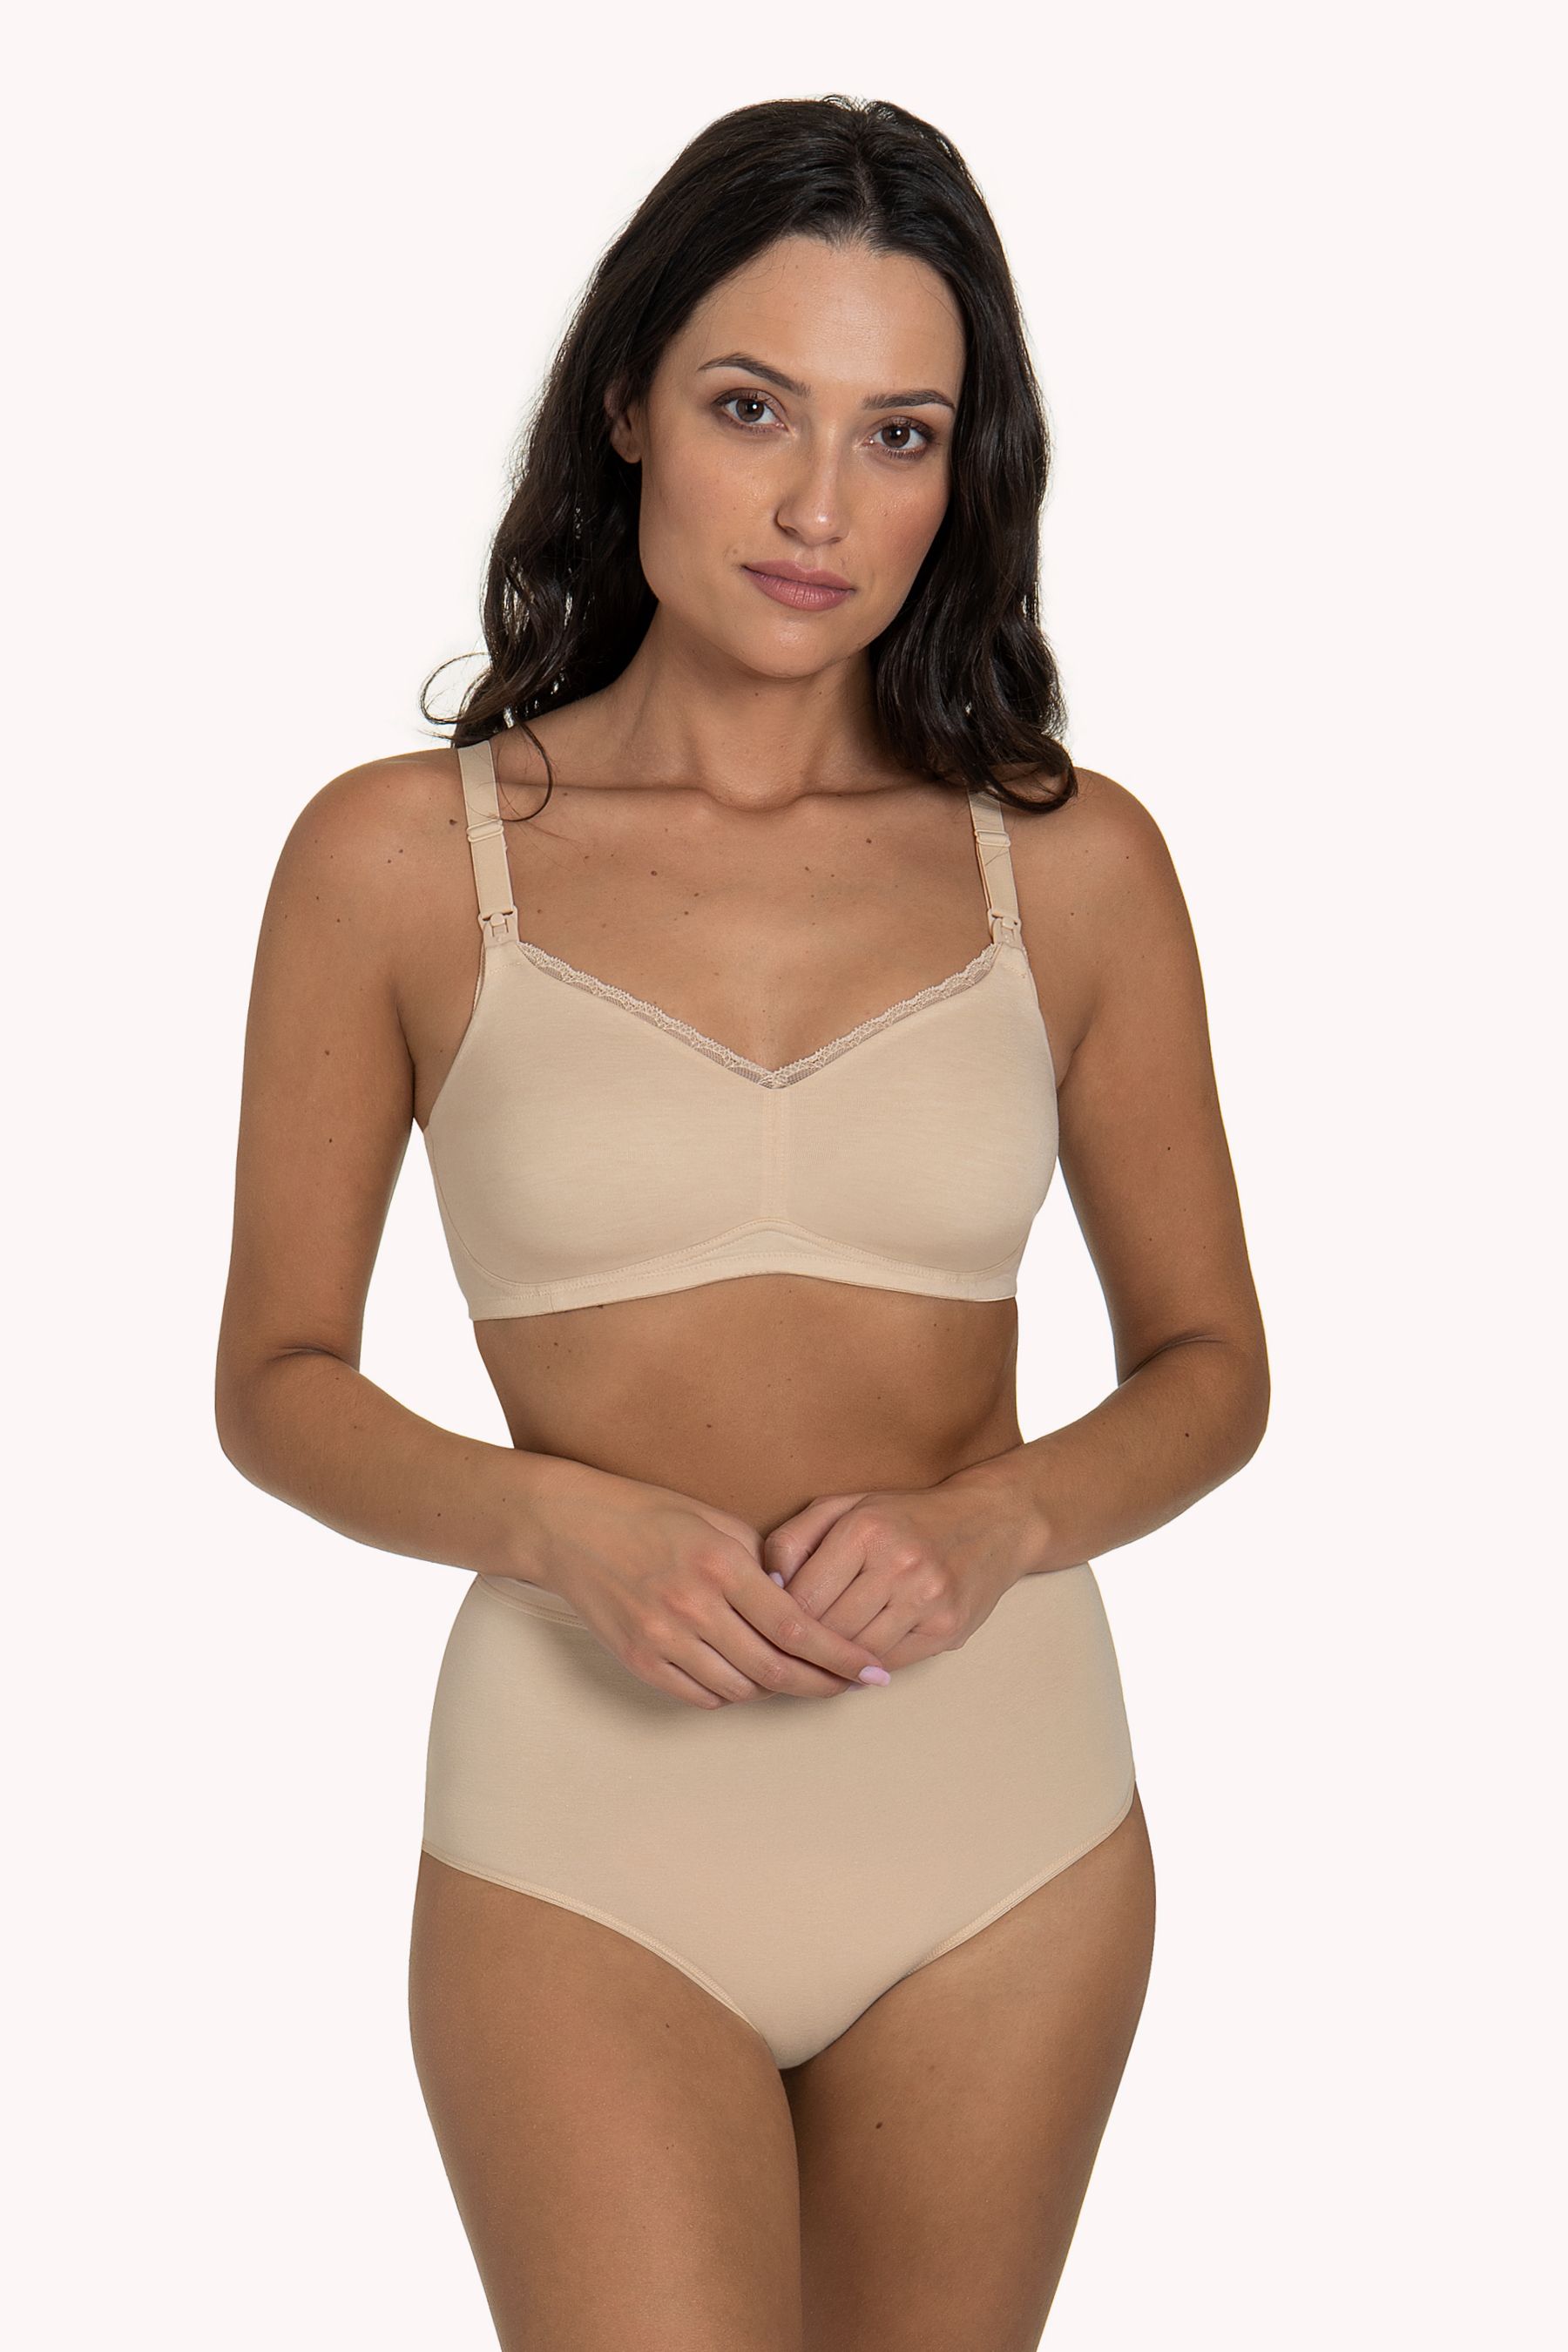 This 'Mummy Love' nursing bra from Lisca is perfect after the arrival of a new family member. The nursing bra is a smart choice to make breastfeeding easier and provide comfort during breastfeeding as well as throughout the day. The pleasant material which hugs the skin ensures comfort and the double-moulded material and inner parts of the cups provide good support for sensitive and heavier breasts.